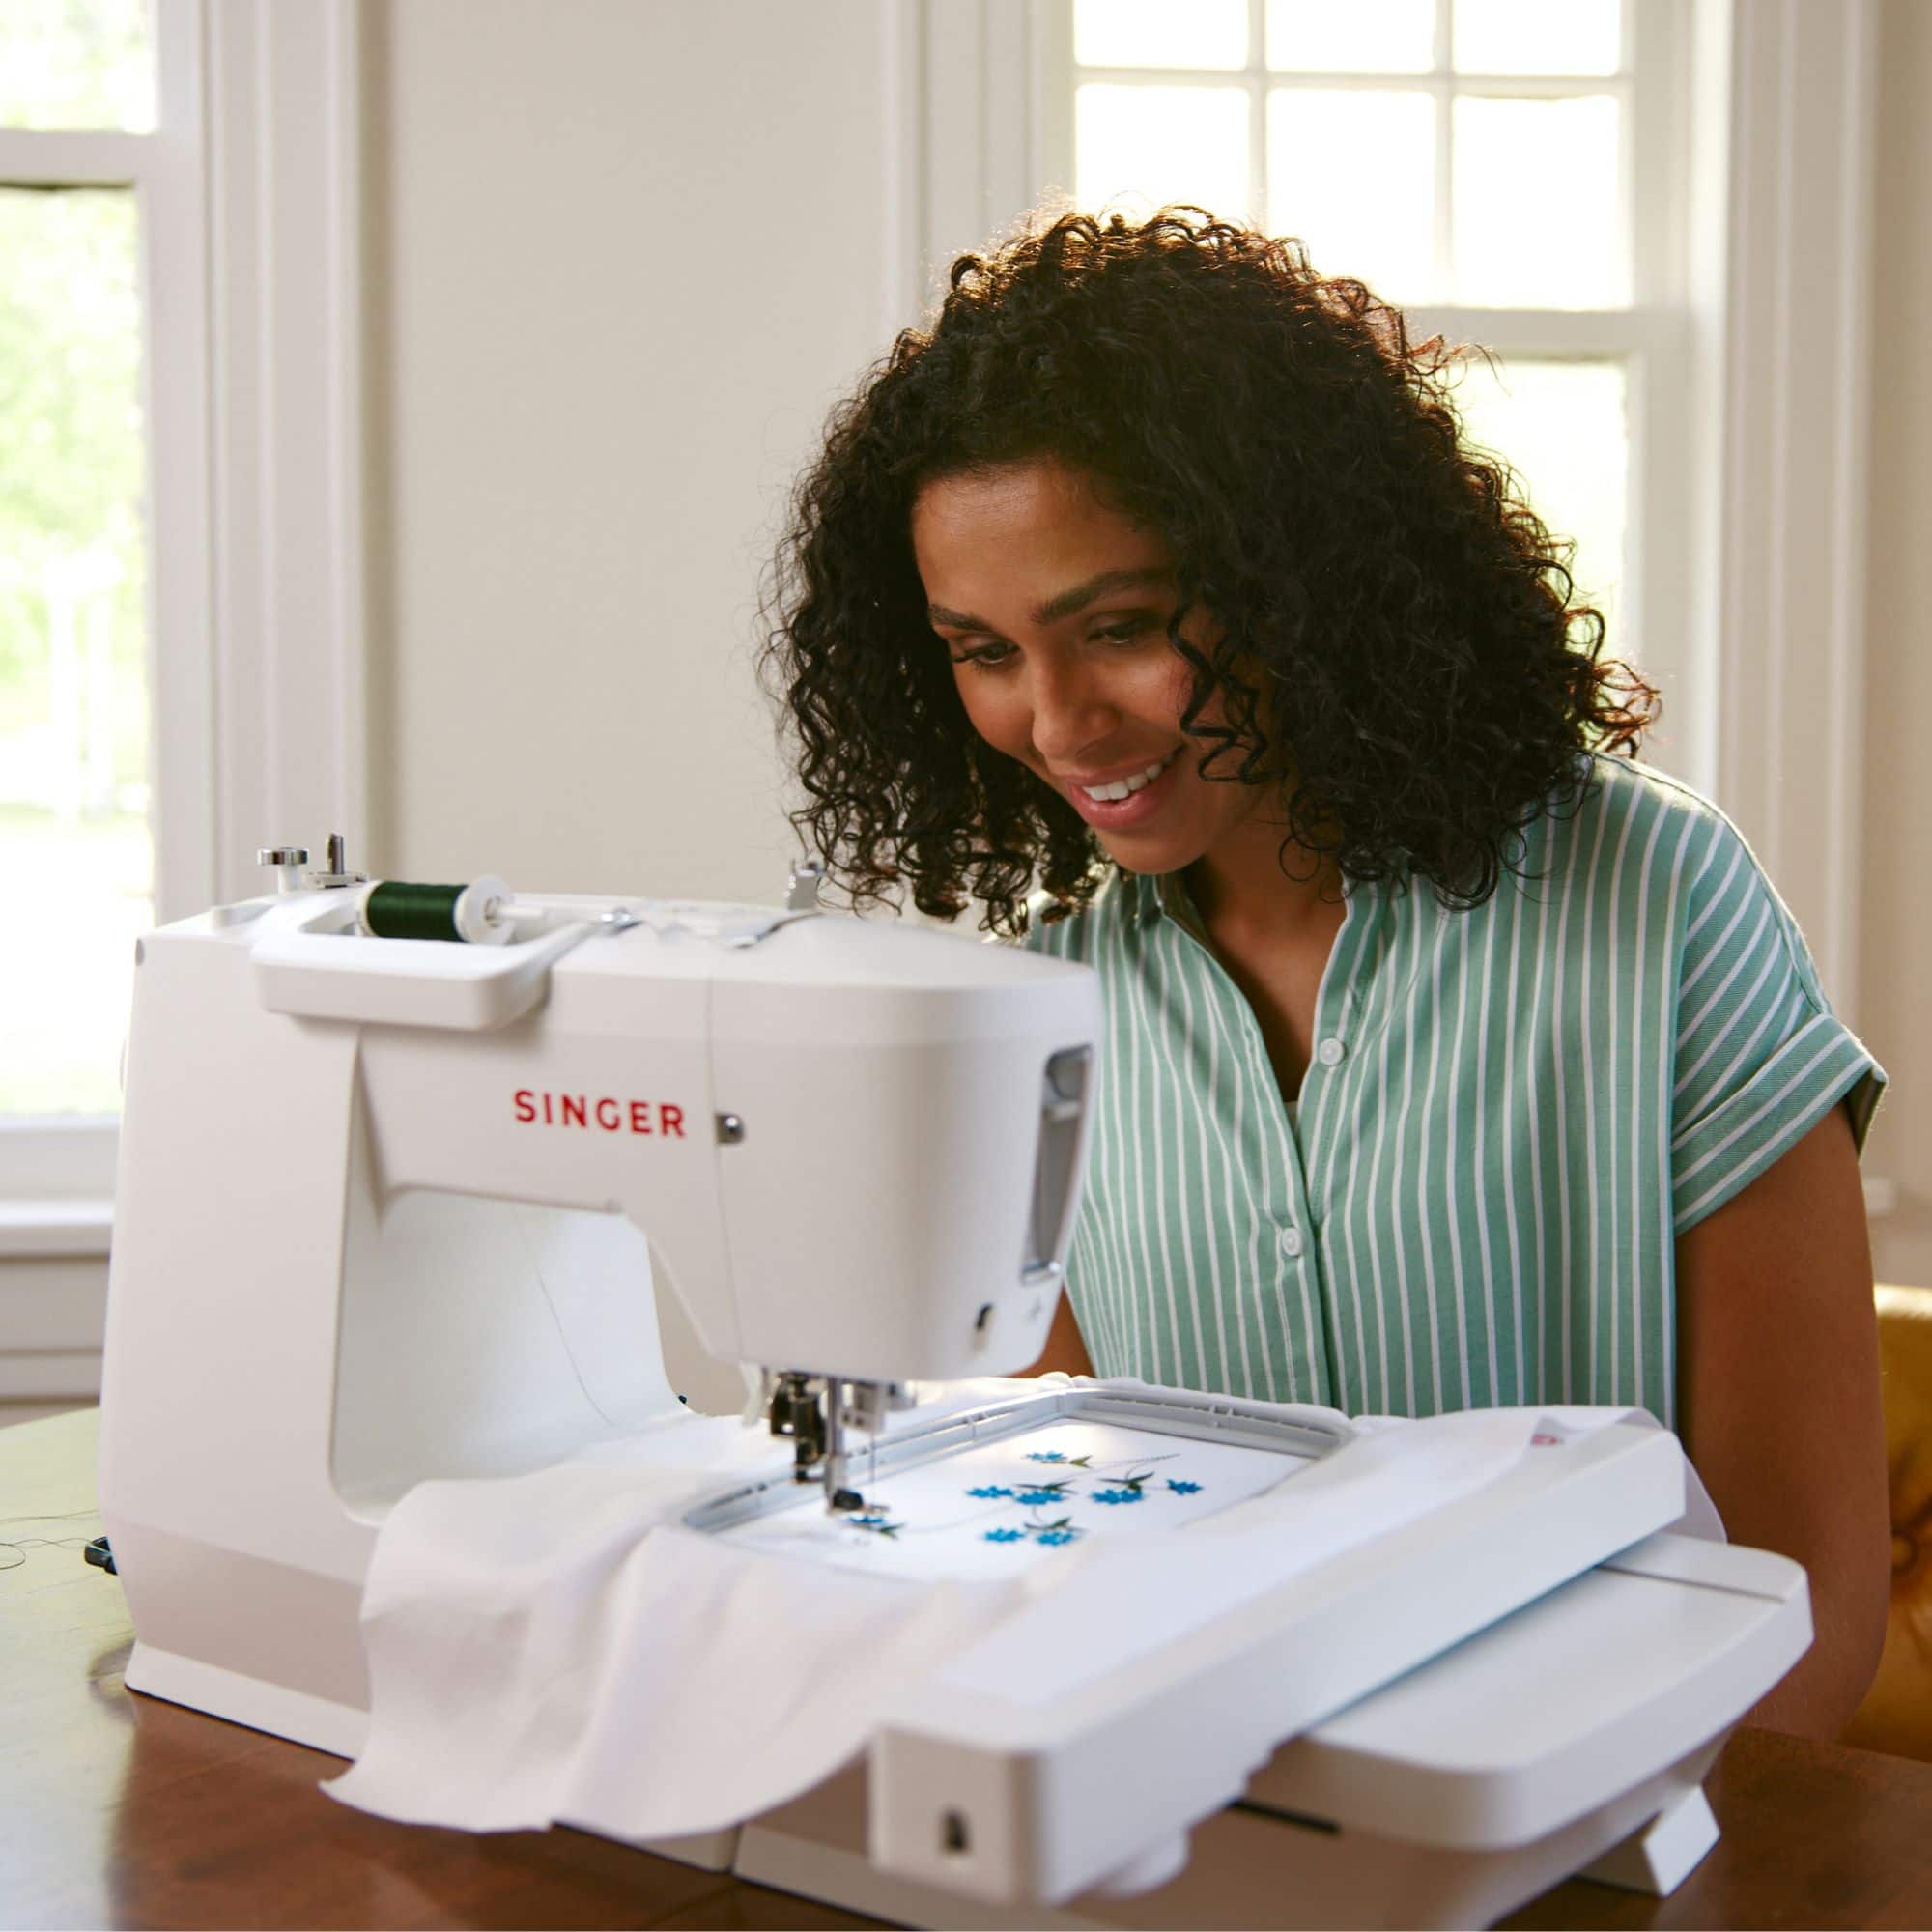 SINGER&#xAE; SE9180 Sewing &#x26; Embroidery Machine